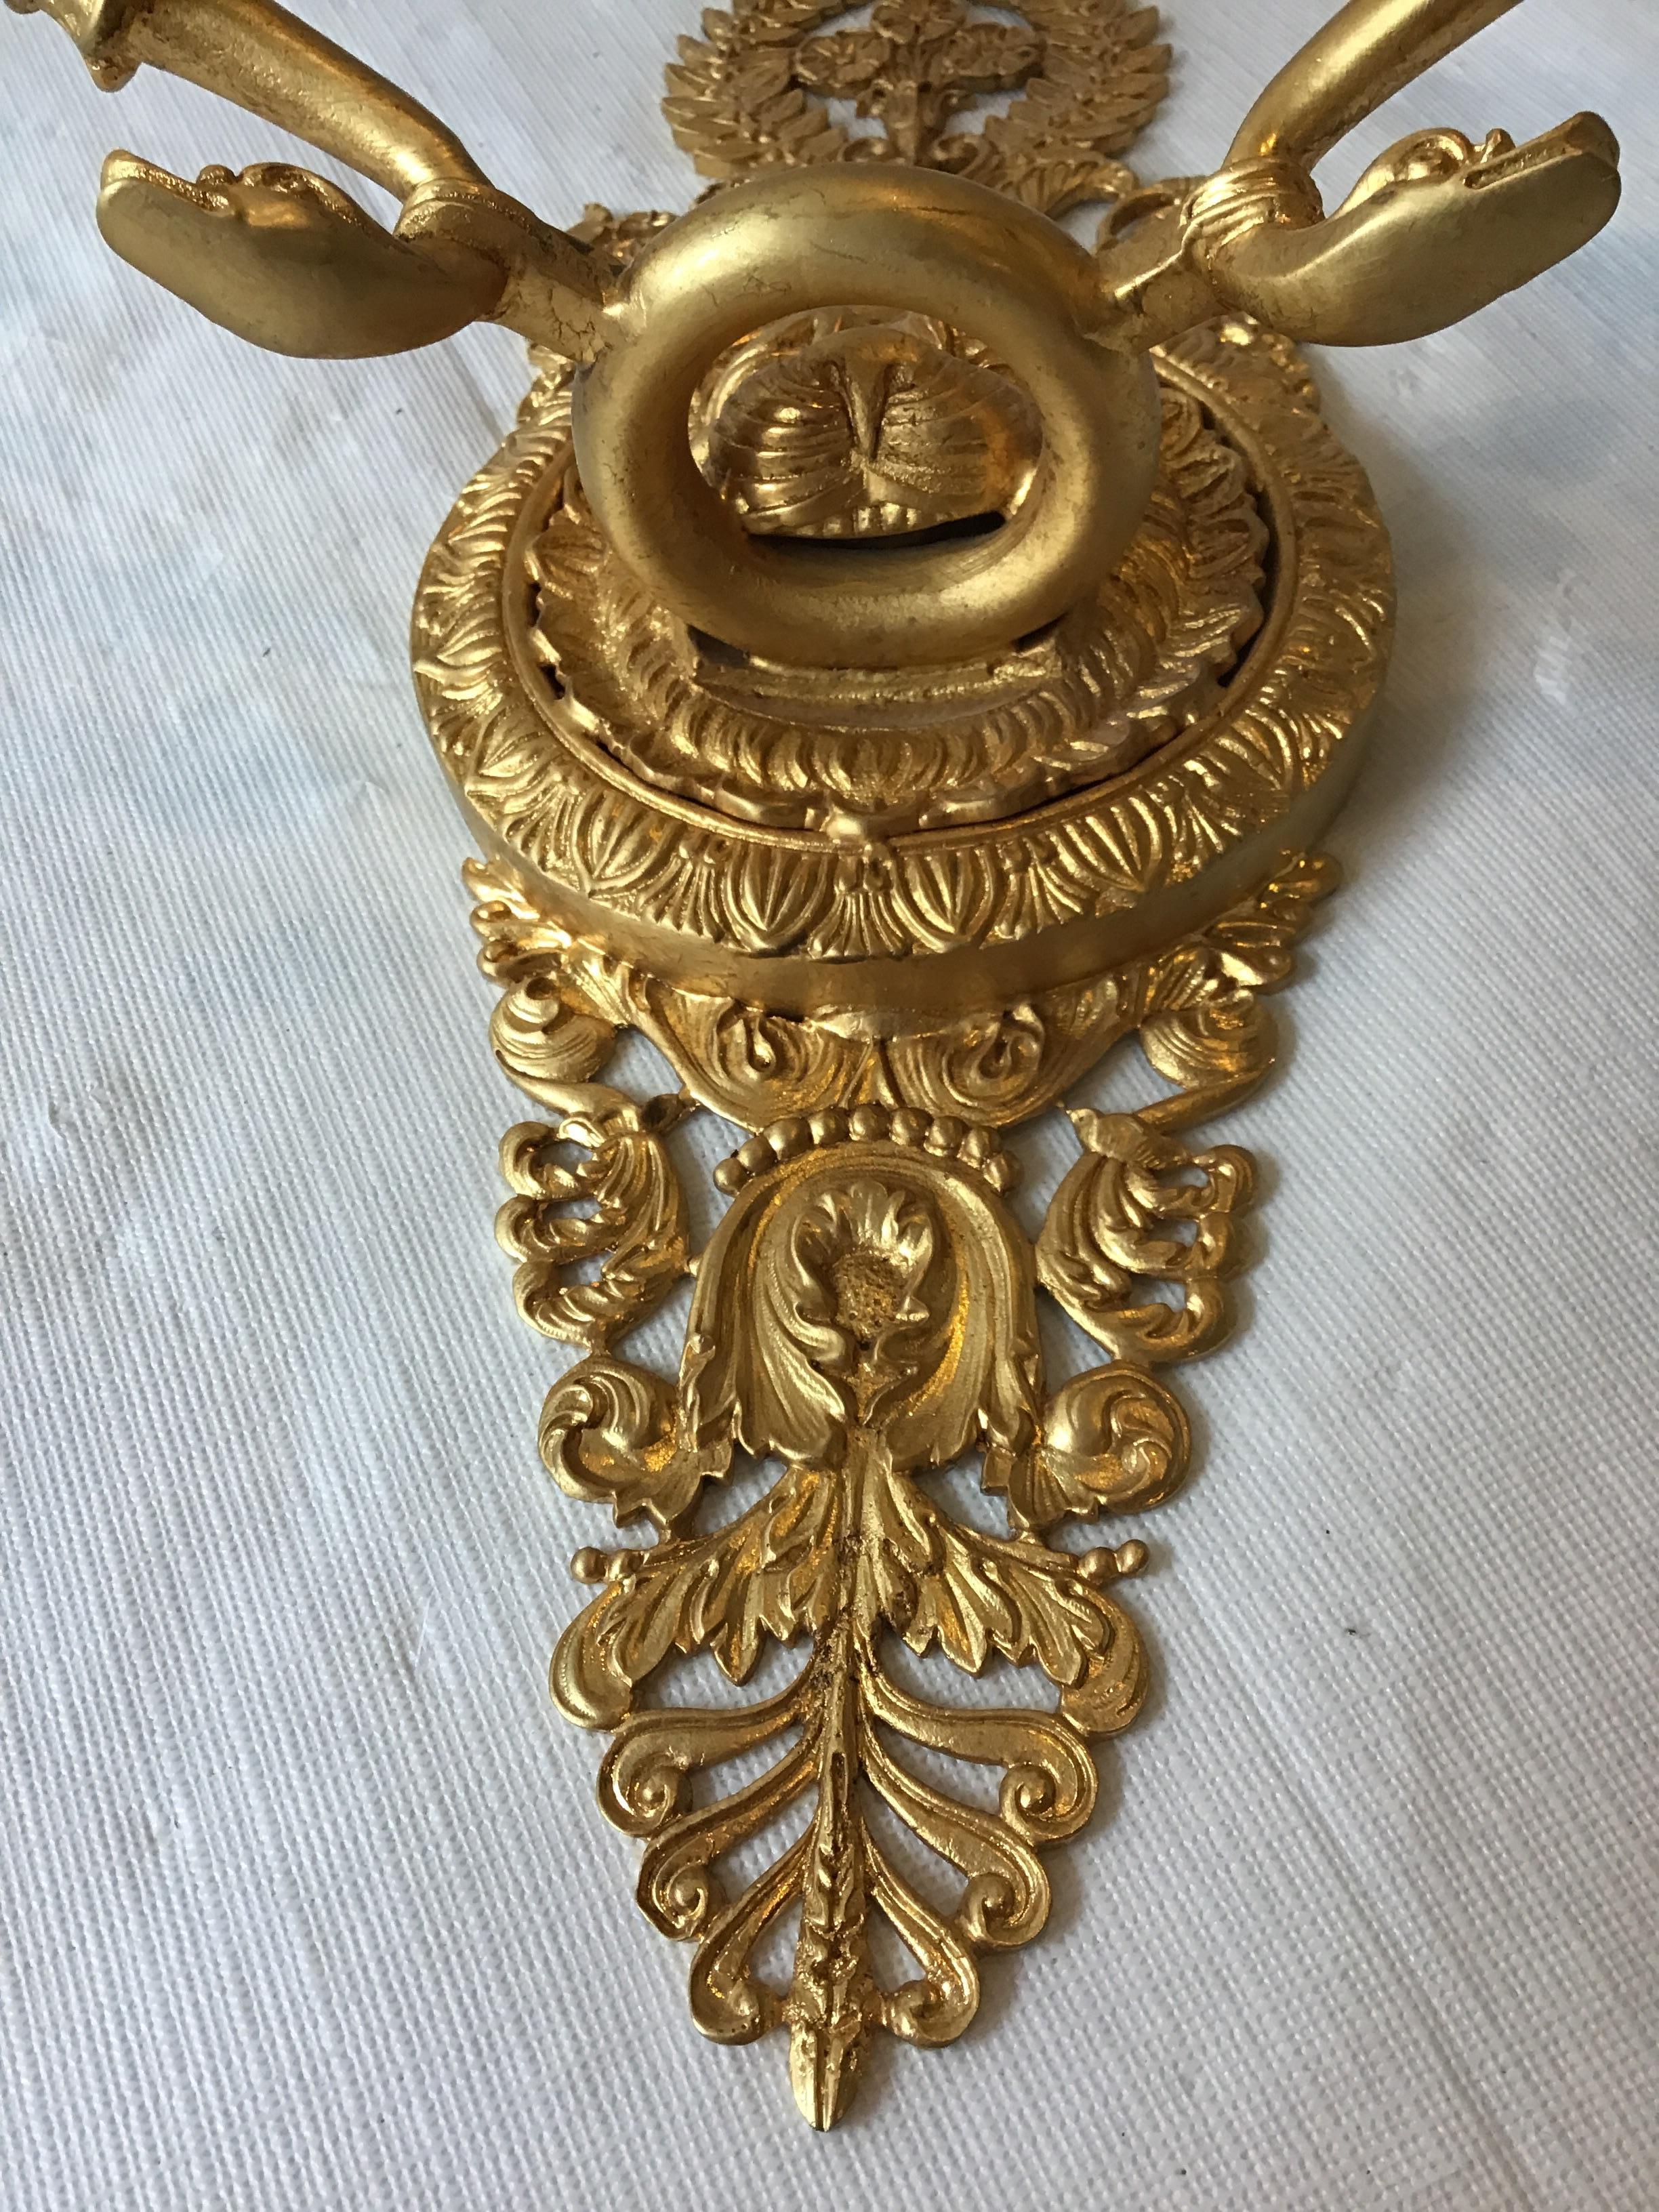 3 Versace Style Gold-Plated Lion Head Classical Sconces For Sale 4